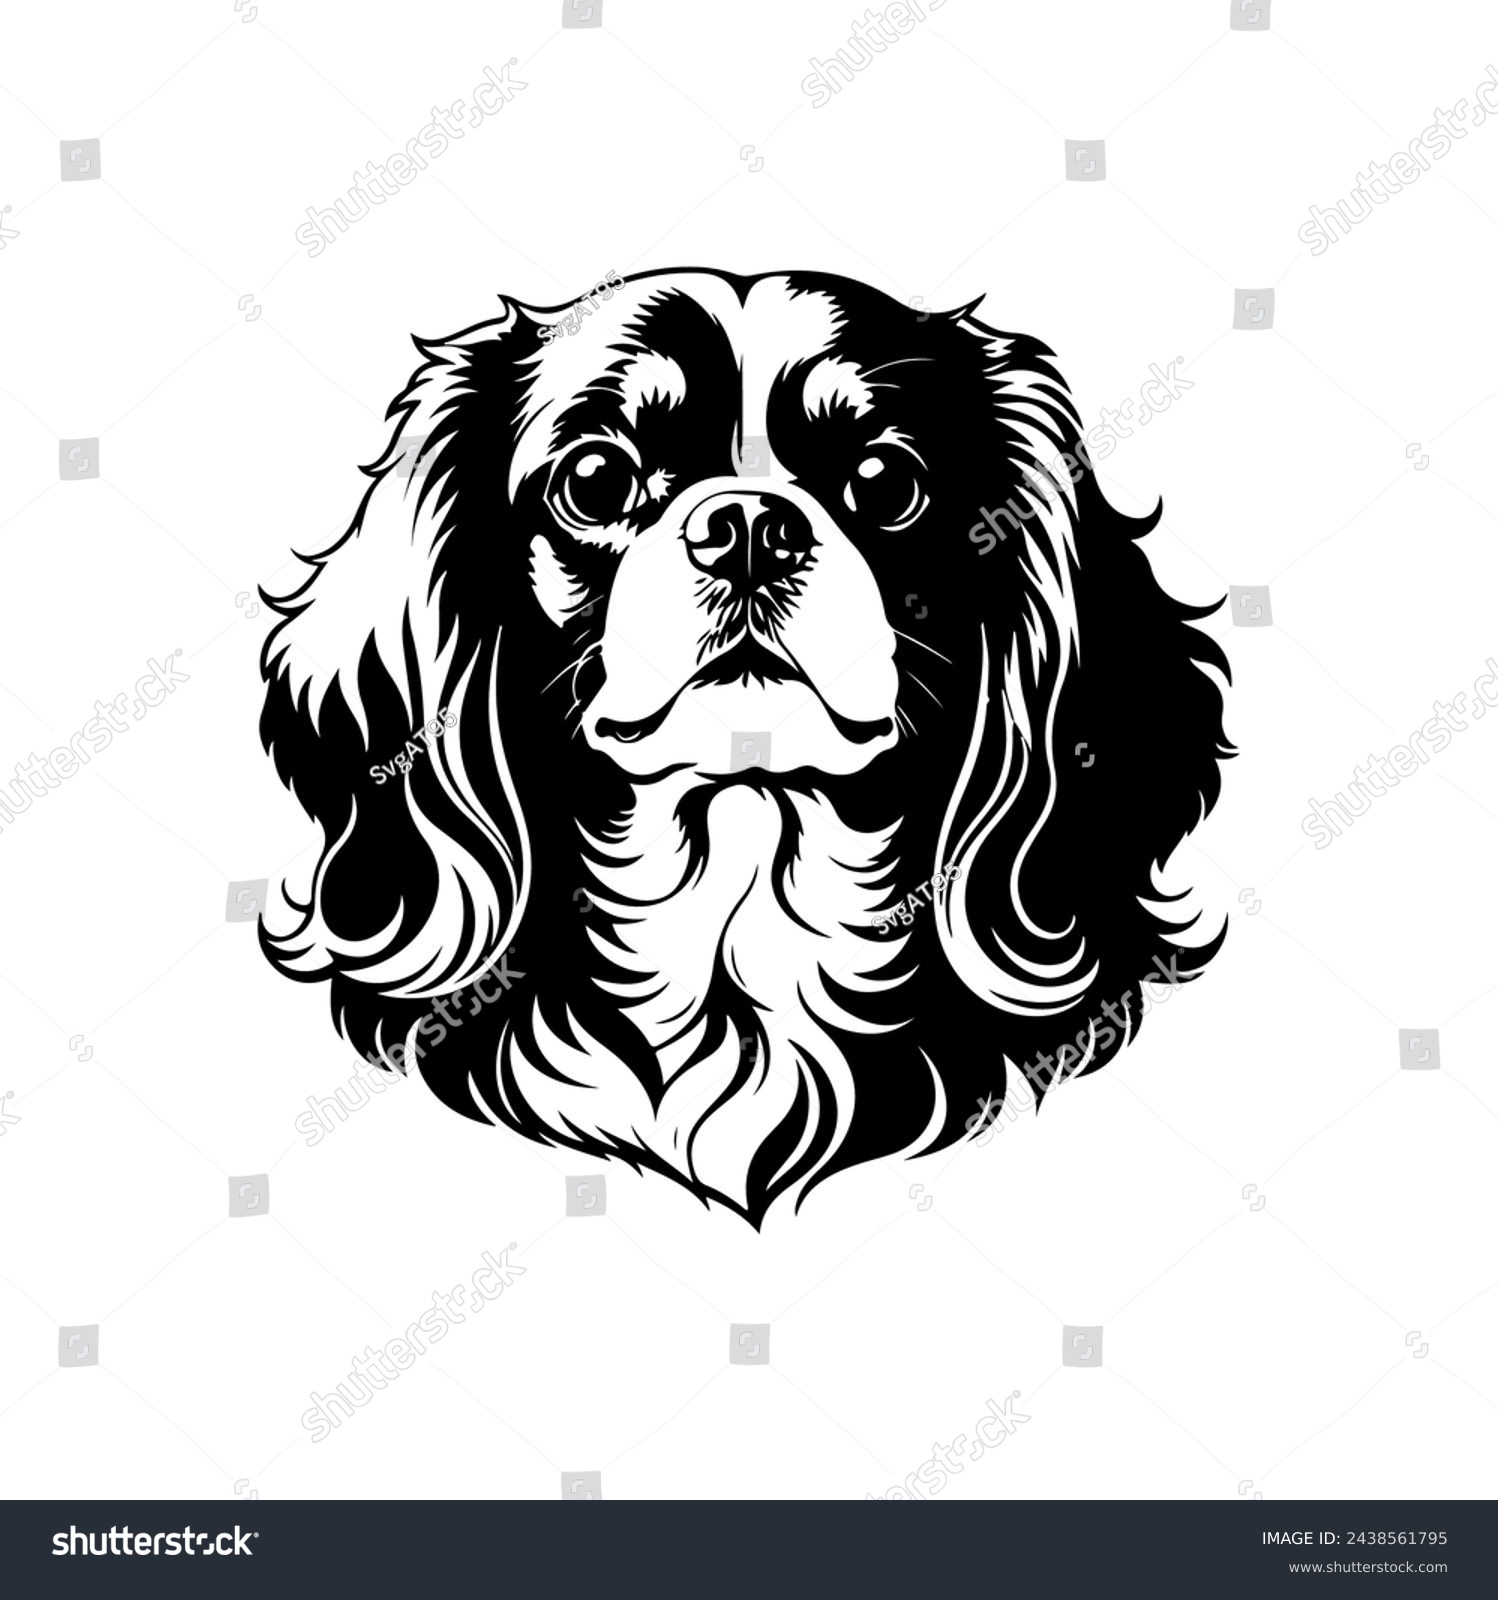 SVG of Portrait of a Cavalier King Charles Spaniel Dog Vector isolated on white background, Dog Silhouettes. svg